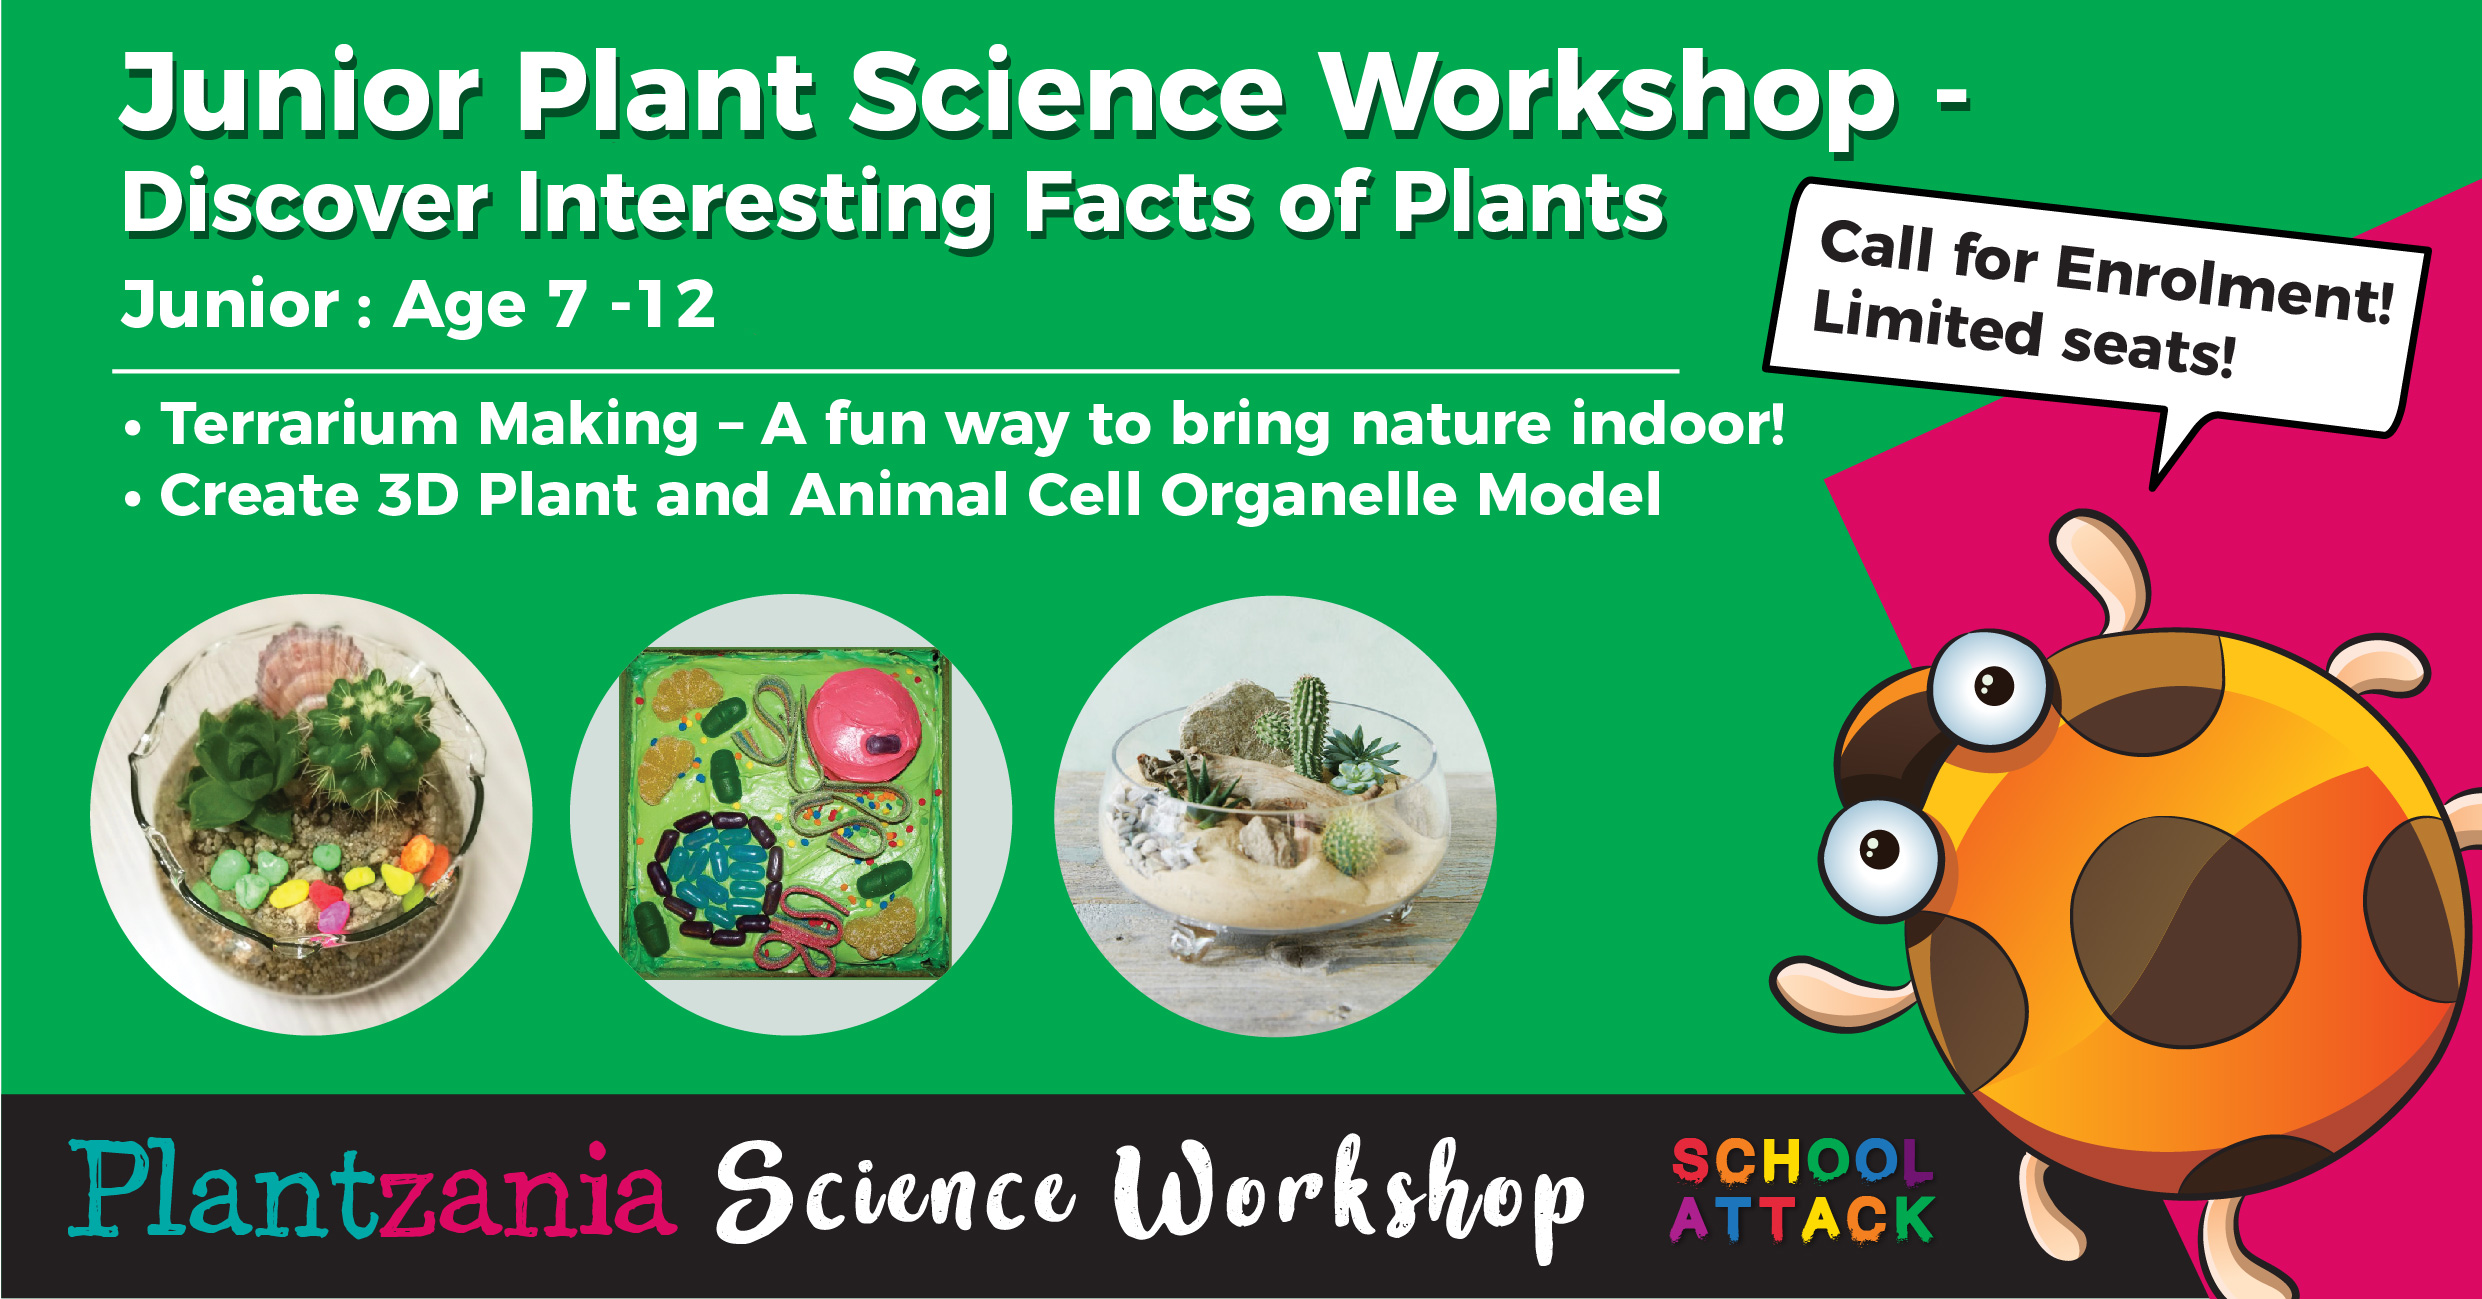 Junior Plant Science Workshop – Discover Interesting Facts of Plants –  Plantzania Sdn Bhd